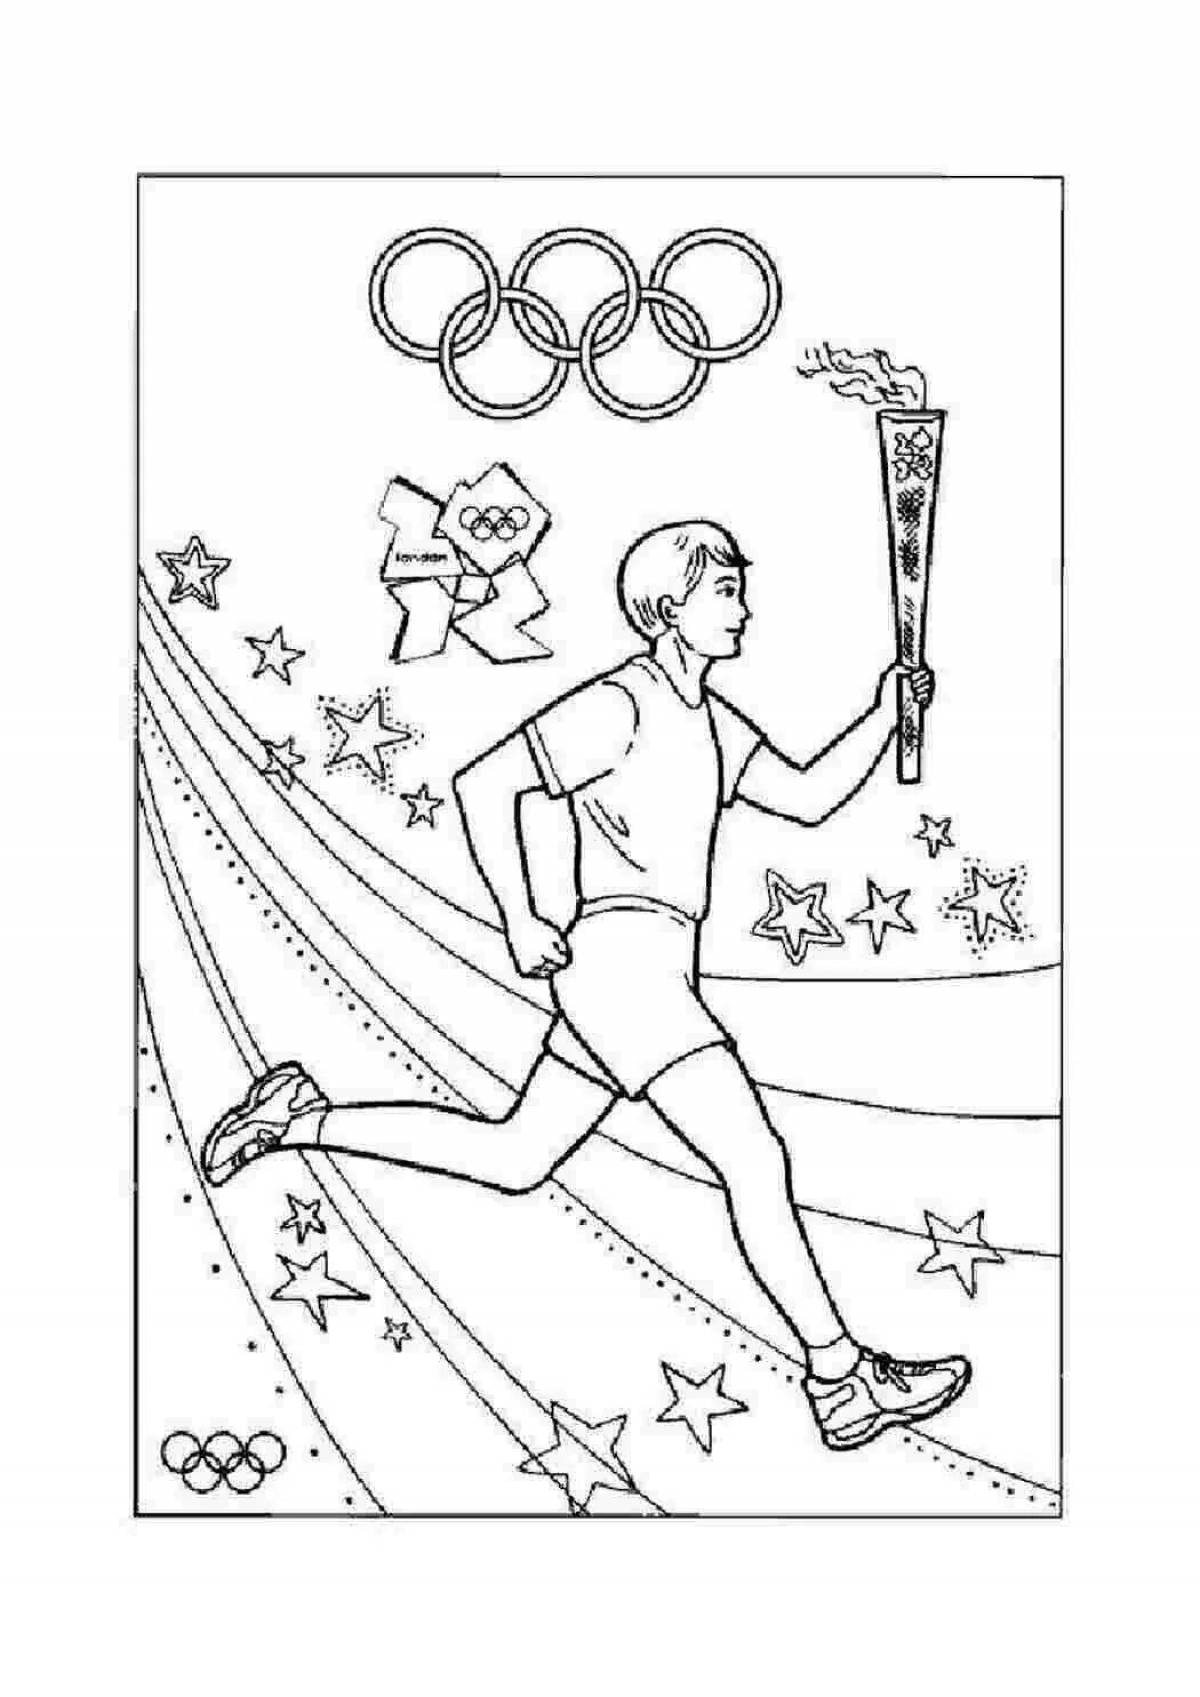 Wonderful olympic games coloring for kids